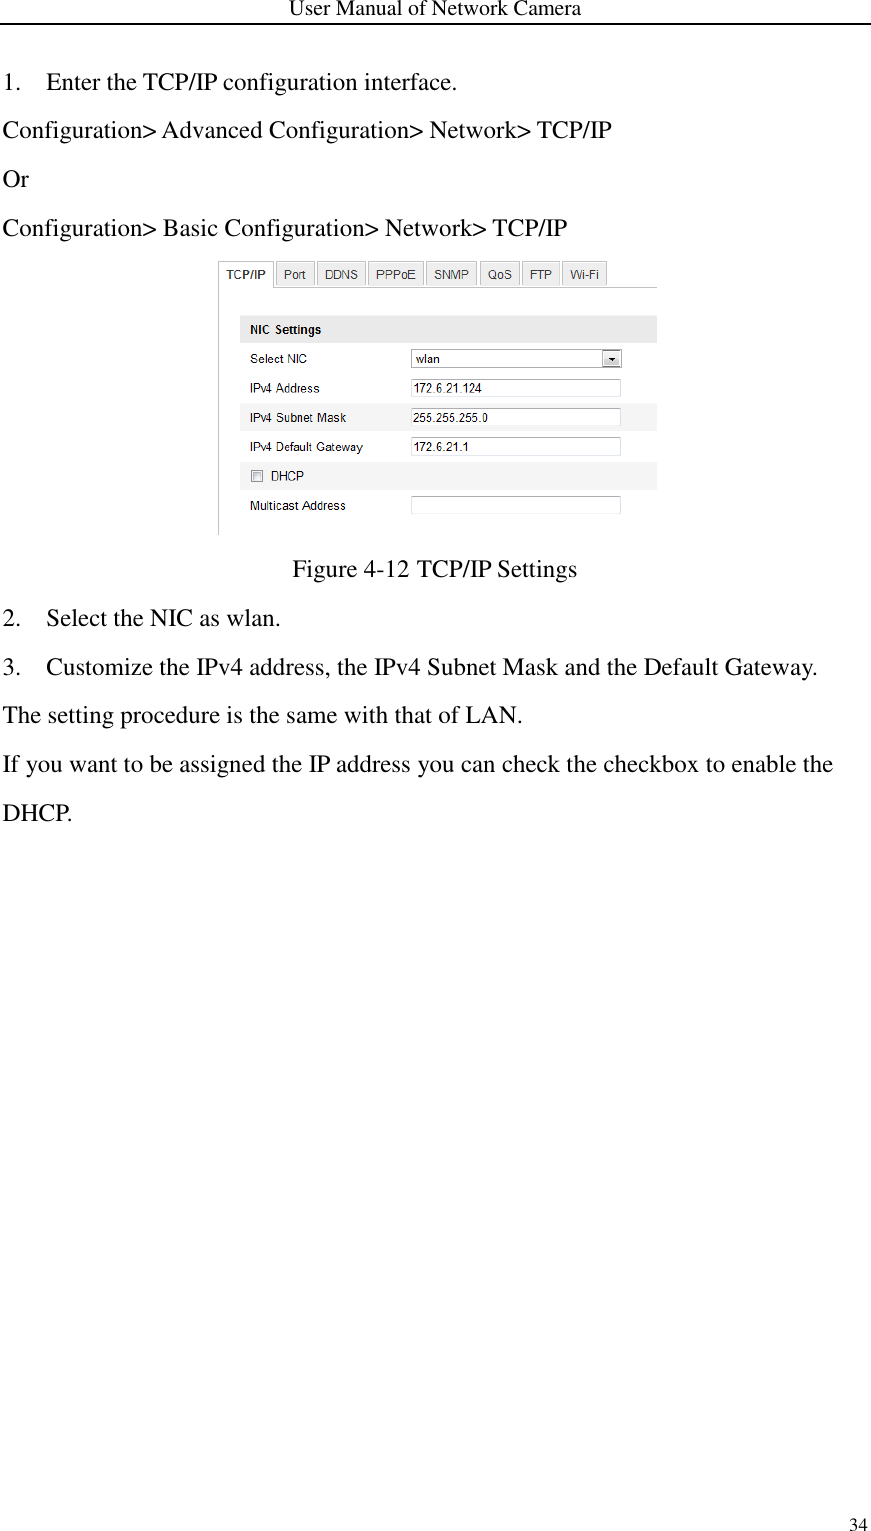 User Manual of Network Camera 34  1. Enter the TCP/IP configuration interface. Configuration&gt; Advanced Configuration&gt; Network&gt; TCP/IP Or Configuration&gt; Basic Configuration&gt; Network&gt; TCP/IP  Figure 4-12 TCP/IP Settings 2. Select the NIC as wlan. 3. Customize the IPv4 address, the IPv4 Subnet Mask and the Default Gateway. The setting procedure is the same with that of LAN. If you want to be assigned the IP address you can check the checkbox to enable the DHCP.